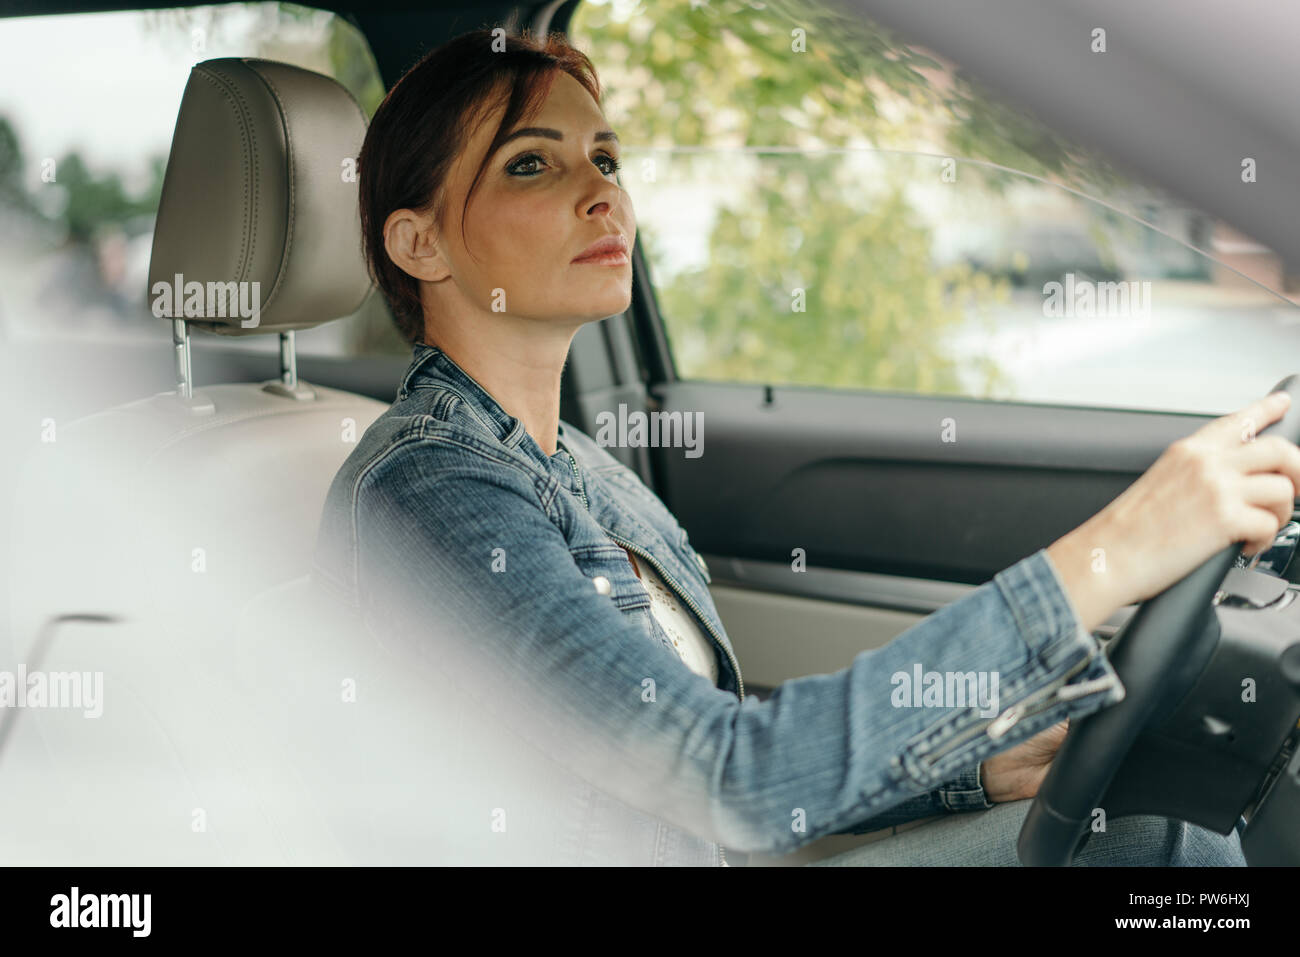 Woman driving car on road commuting Stock Photo